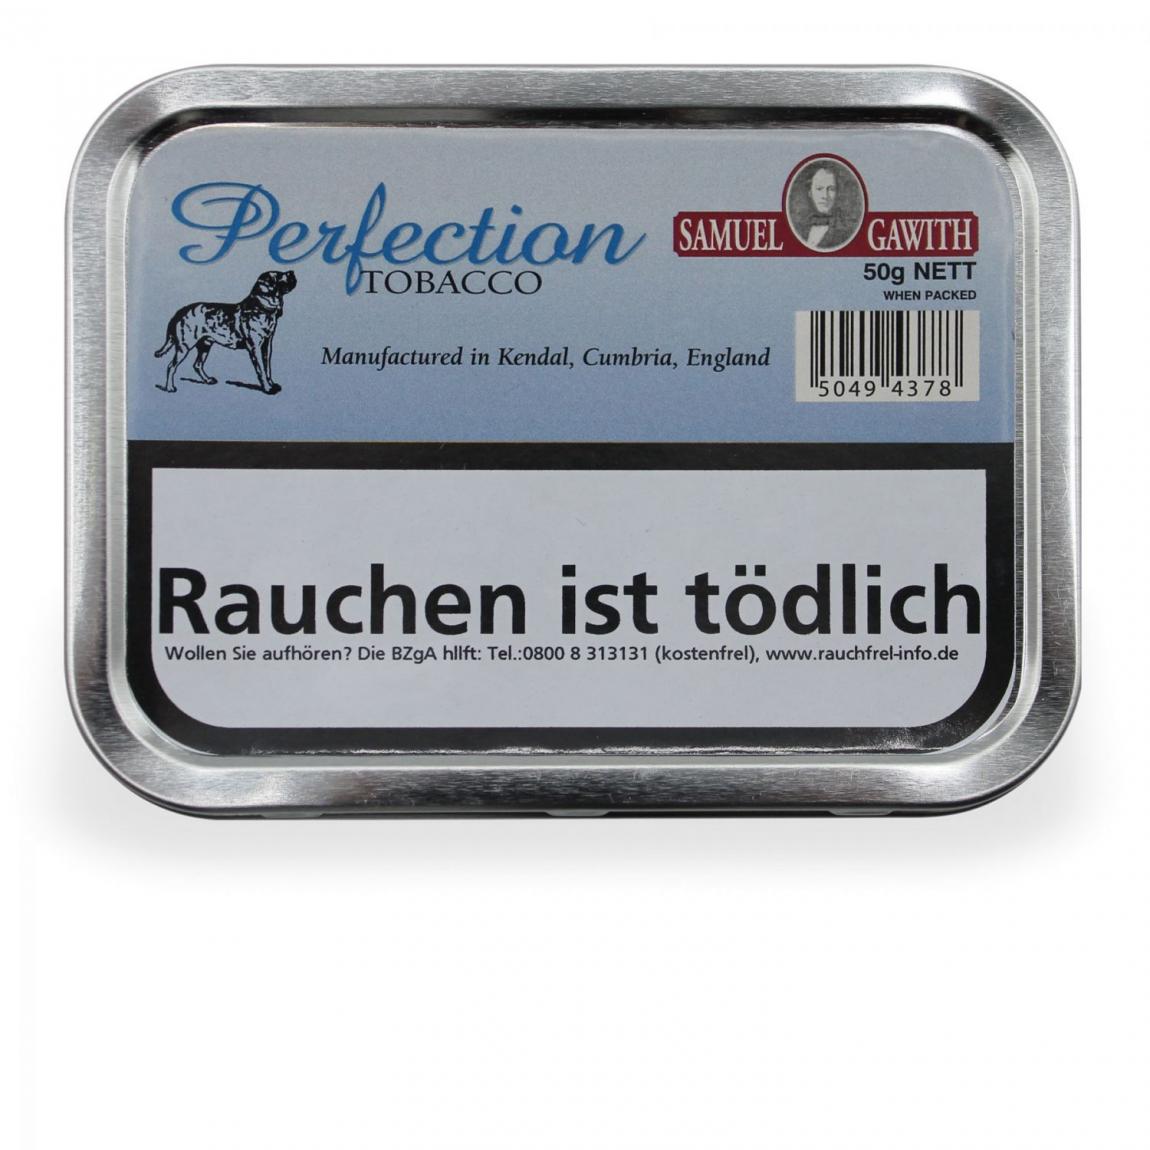 Samuel Gawith »Perfection Tobacco«